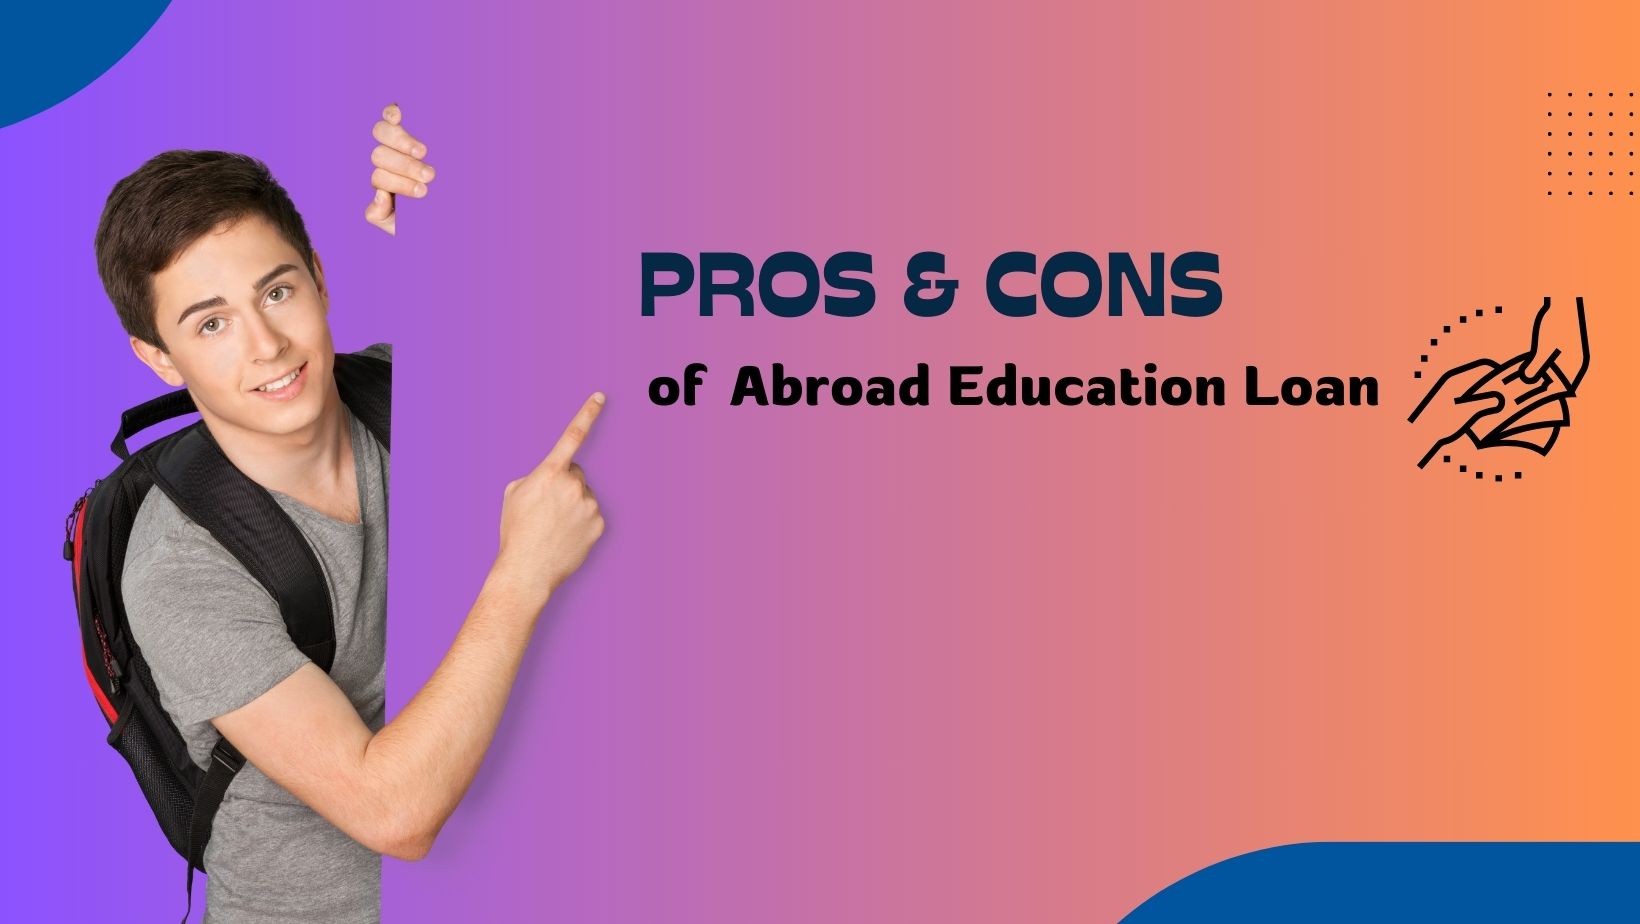 Pros & Cons of Overseas Education Loan